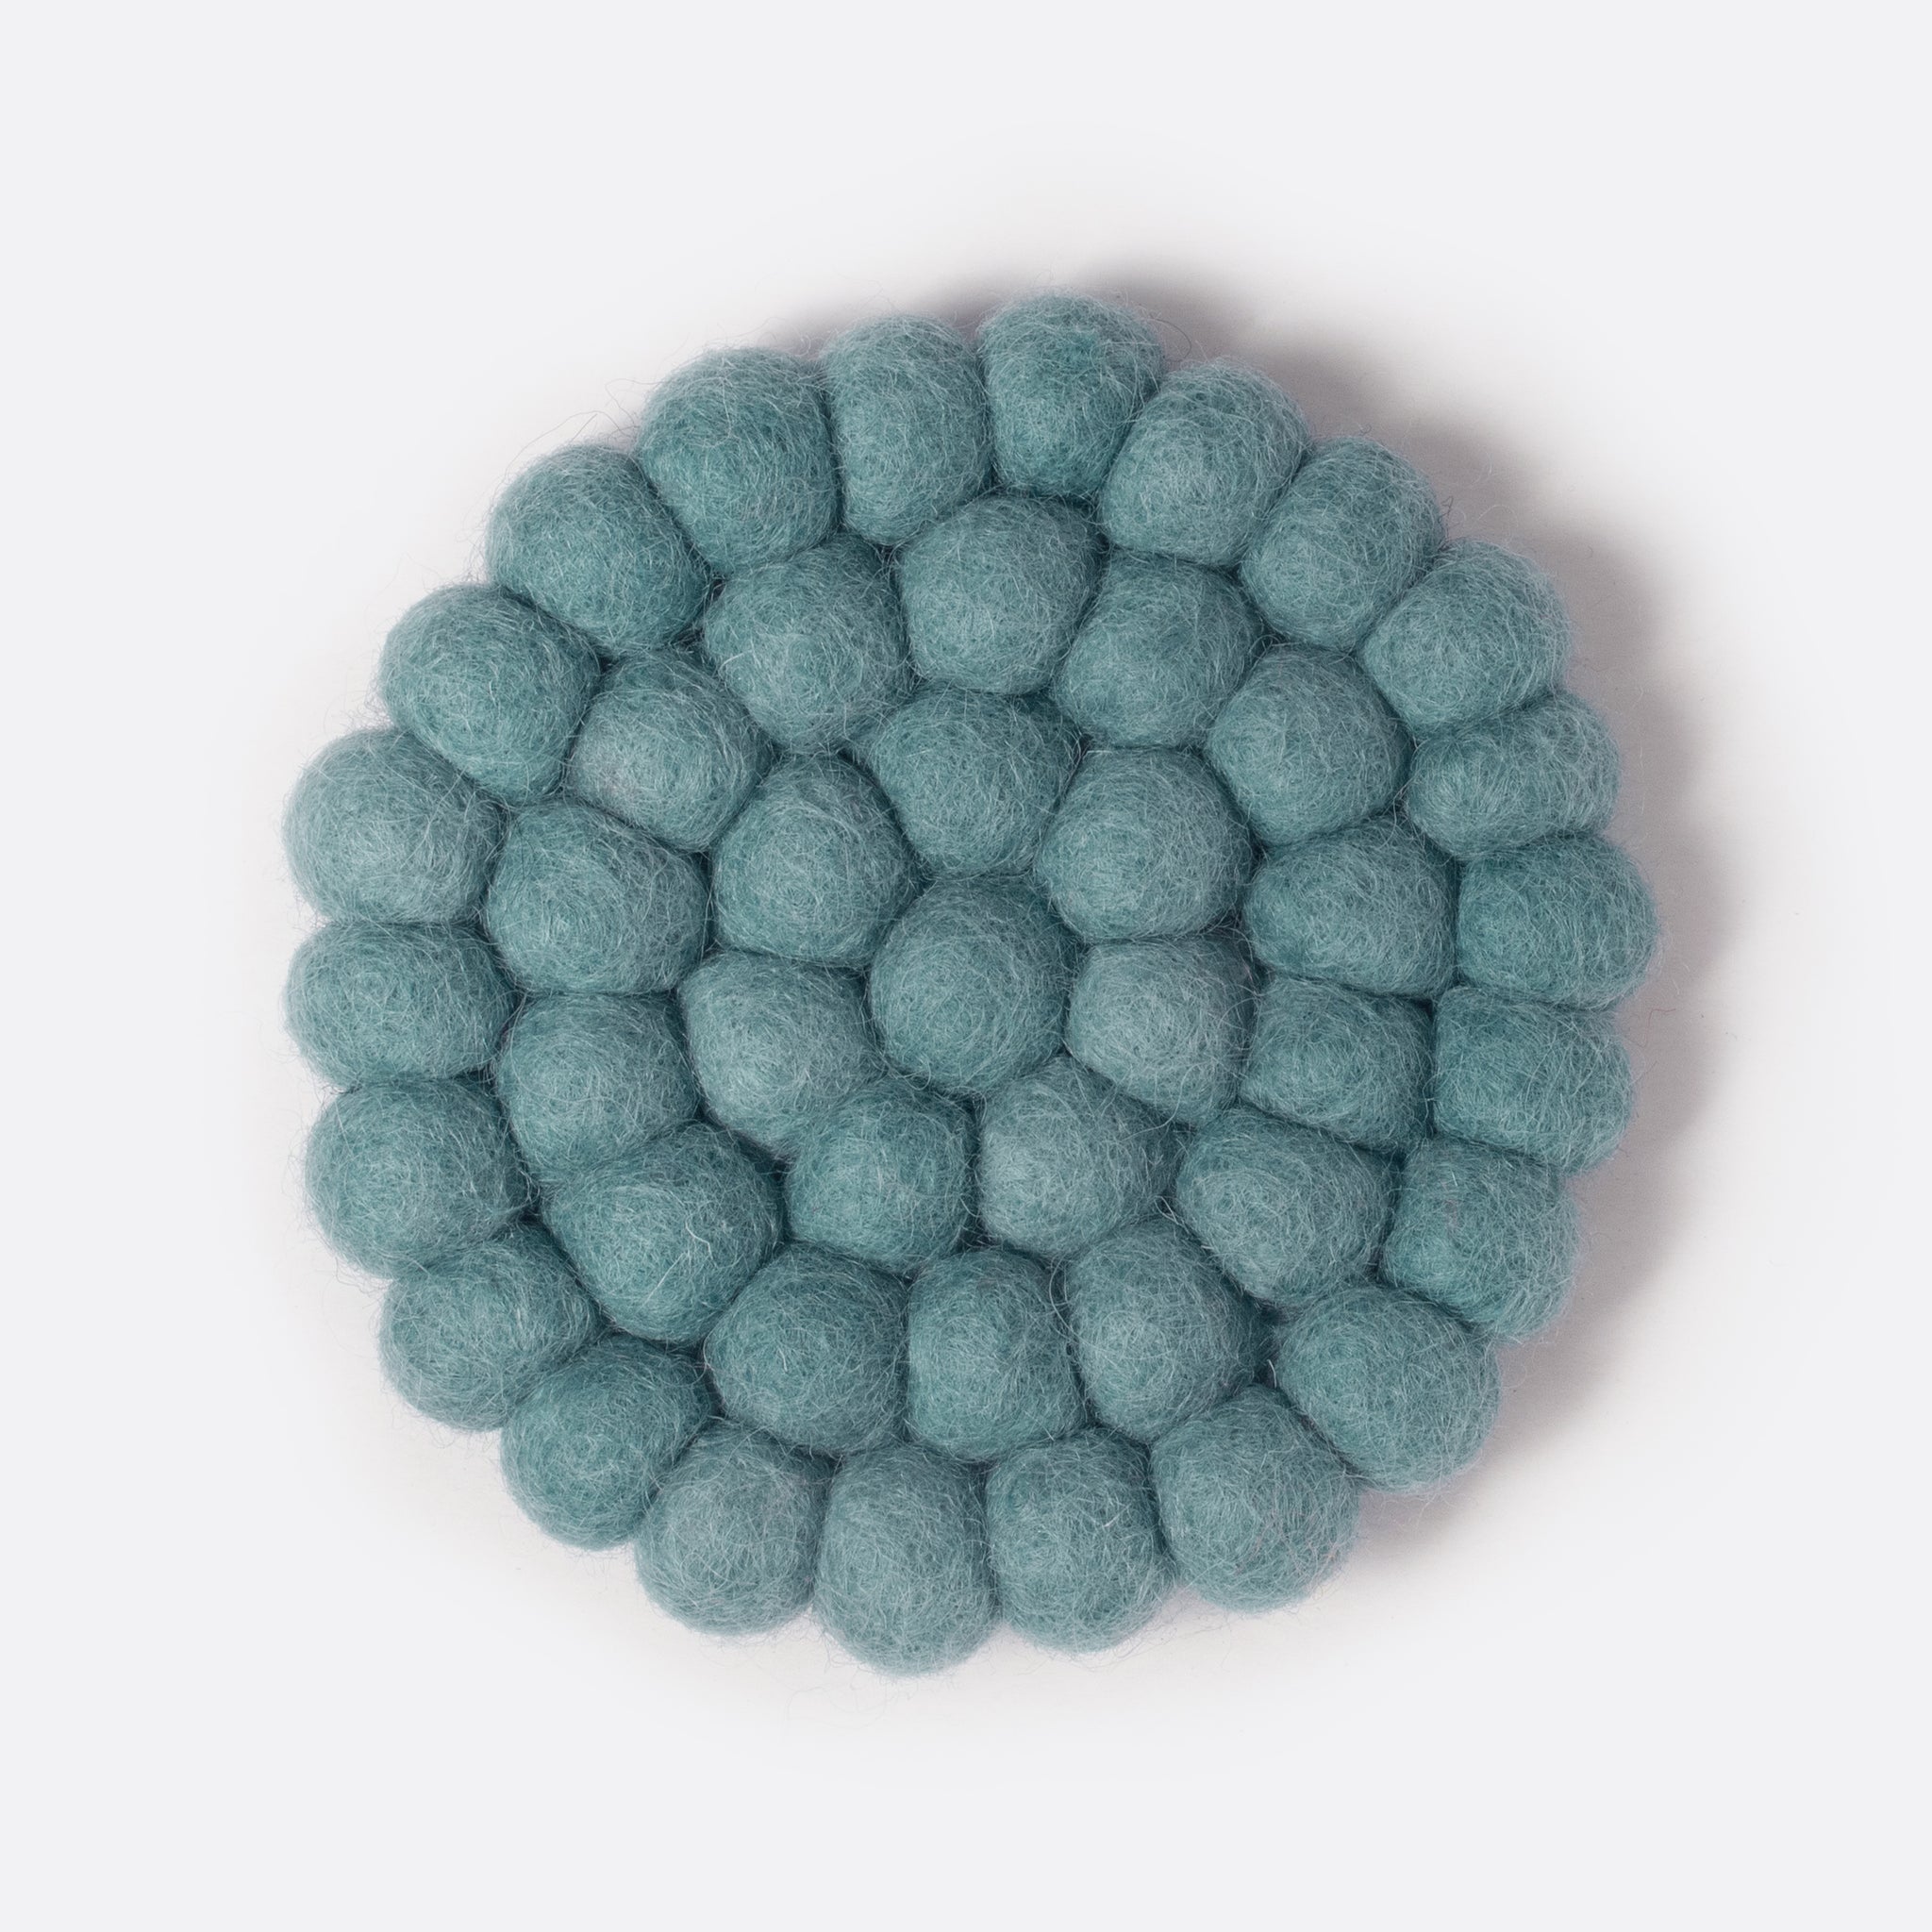 Round felt coaster which is made from little felt balls. The color is light blue-grey.